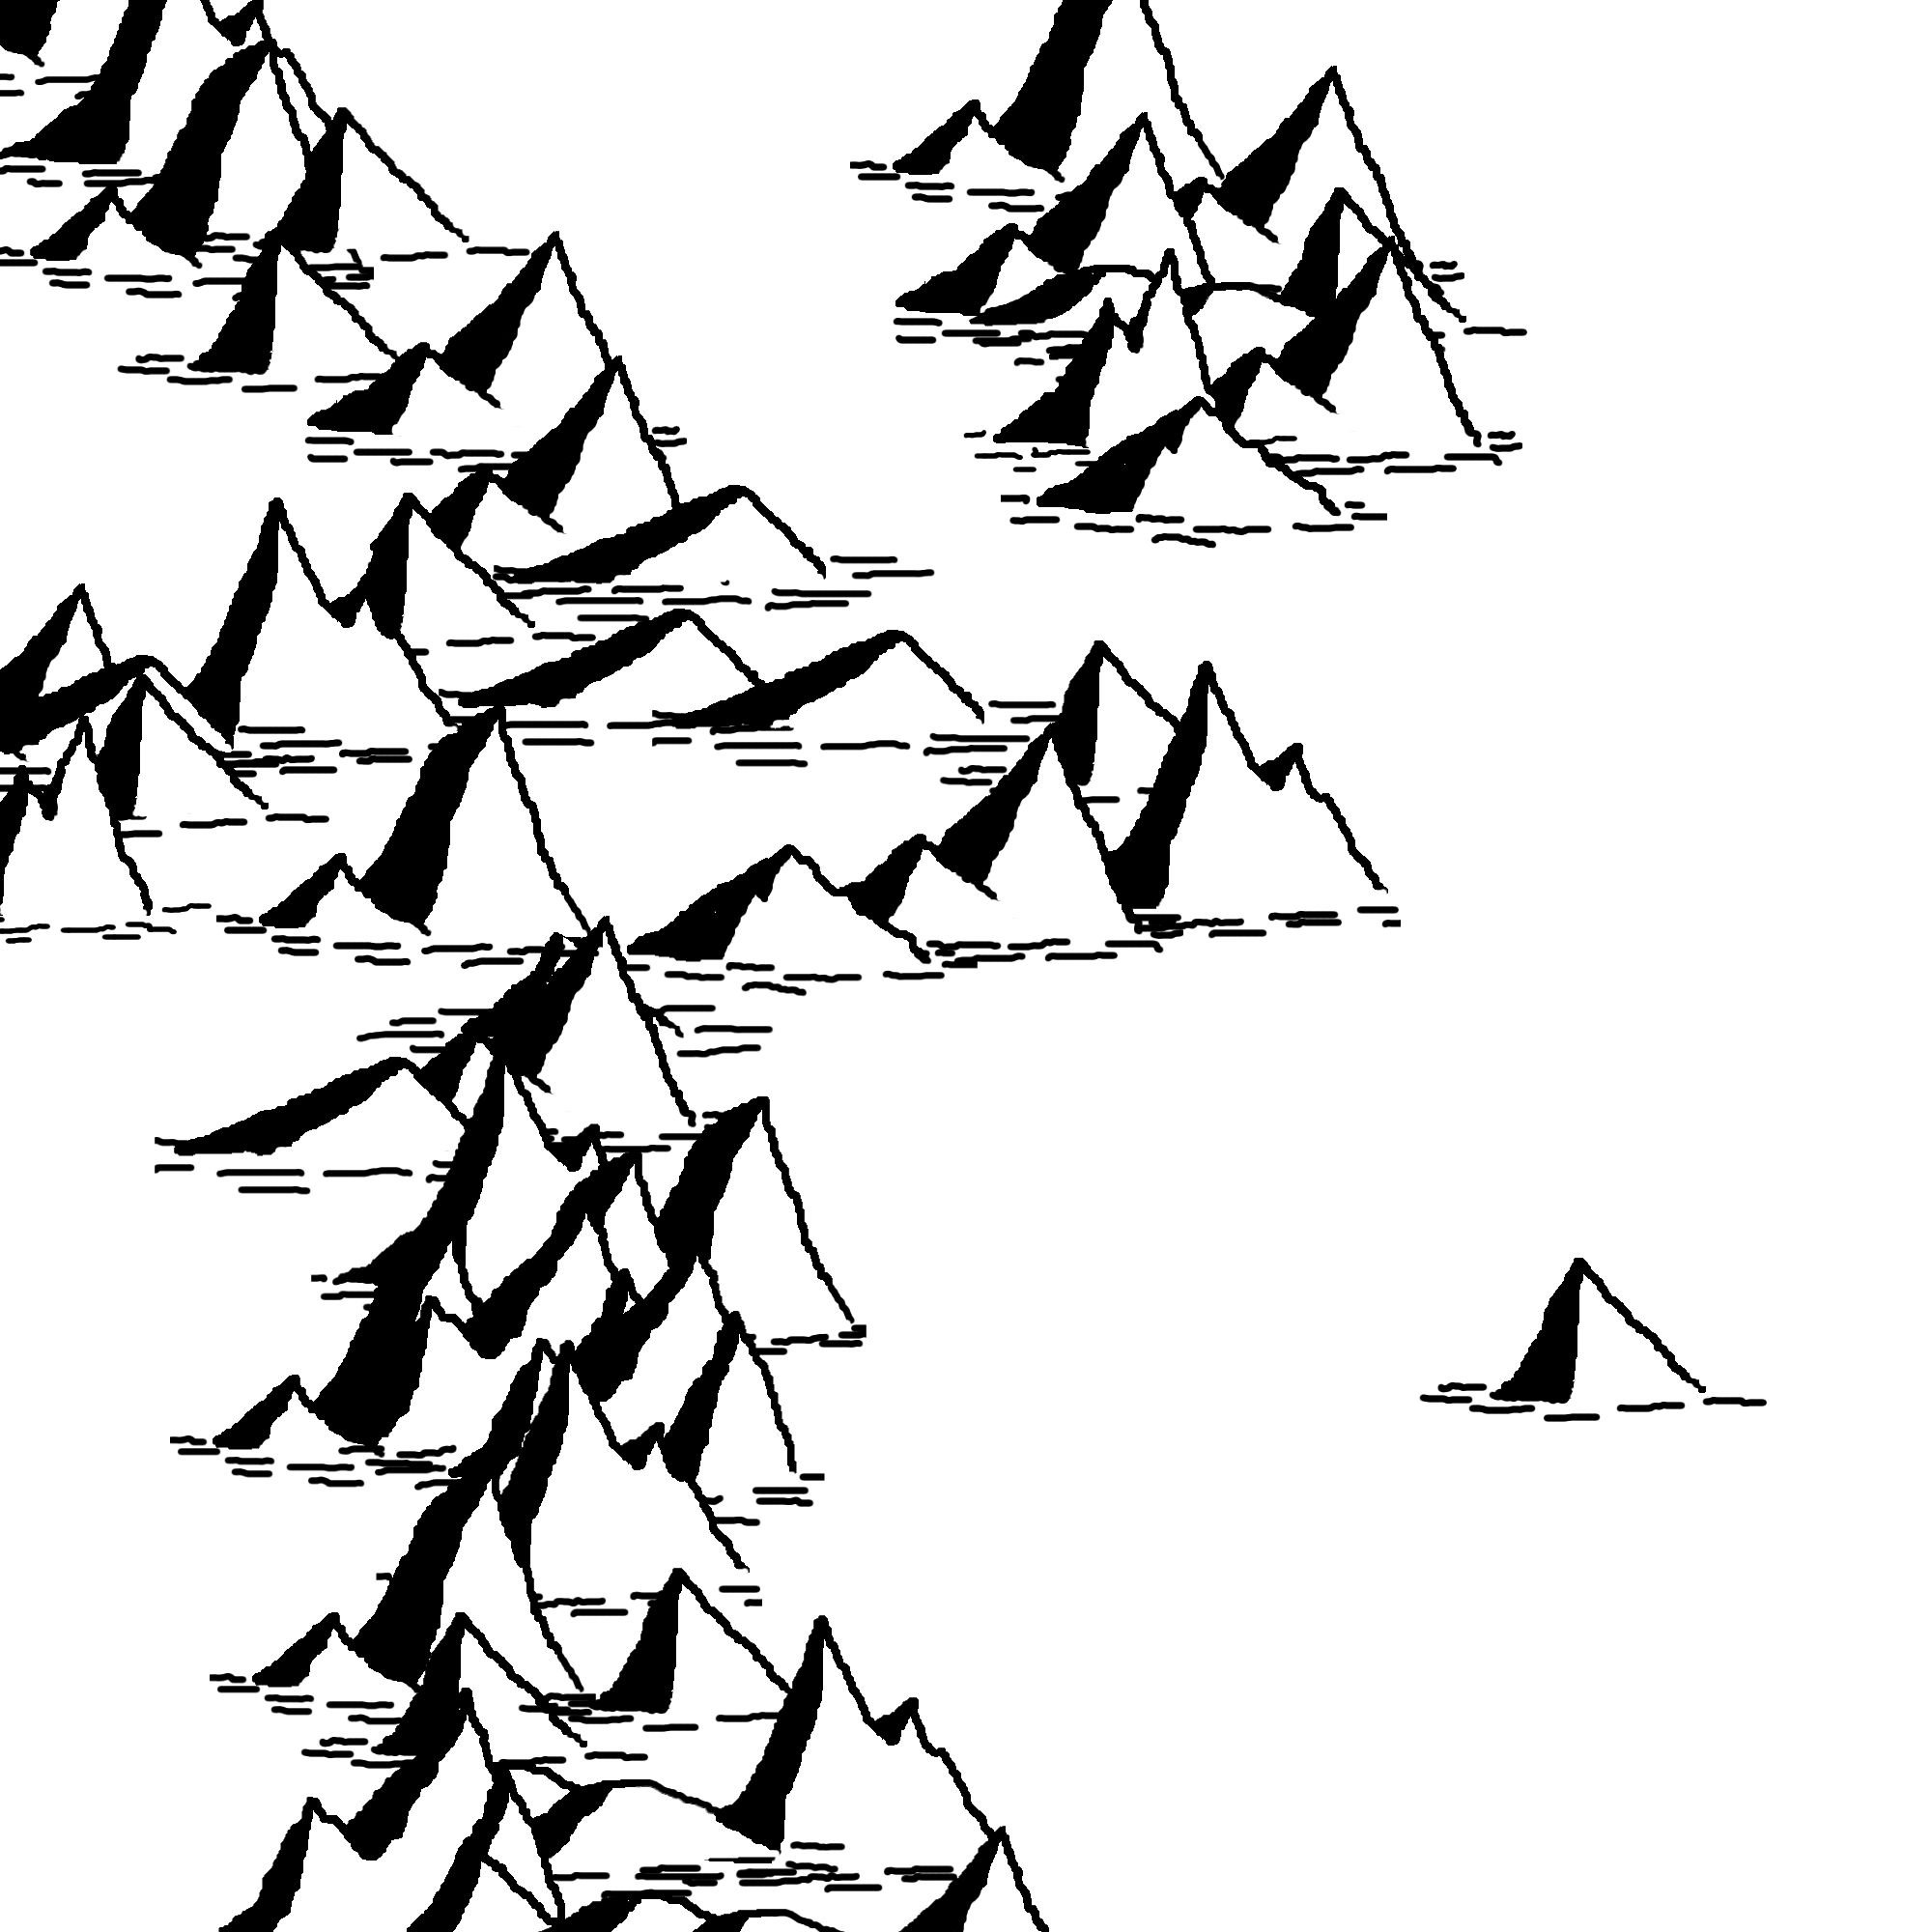 Makin' mountains and makin' trees. | Cartographic Principles in ...